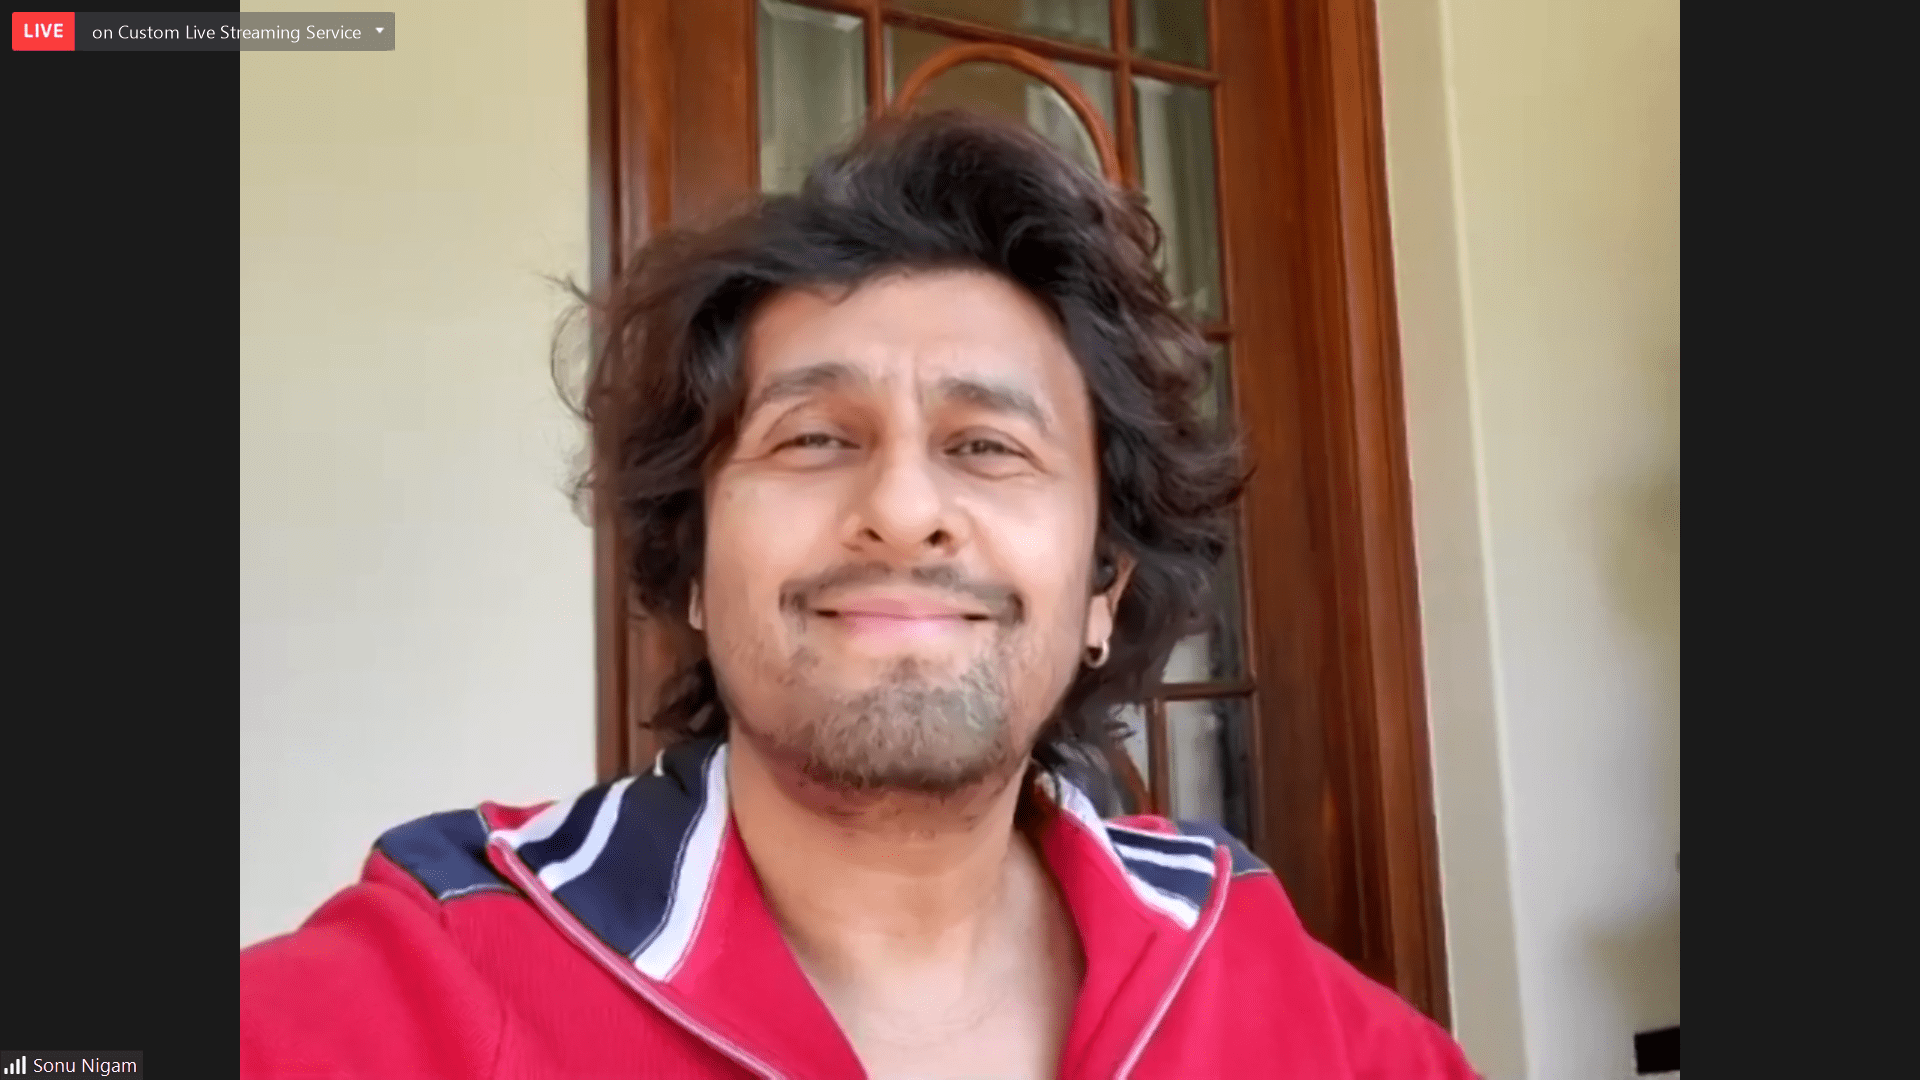 Sonu Nigam, singer and music director, talks about his life, his motivation to pursue music, the persistence required to follow dreams and much more.